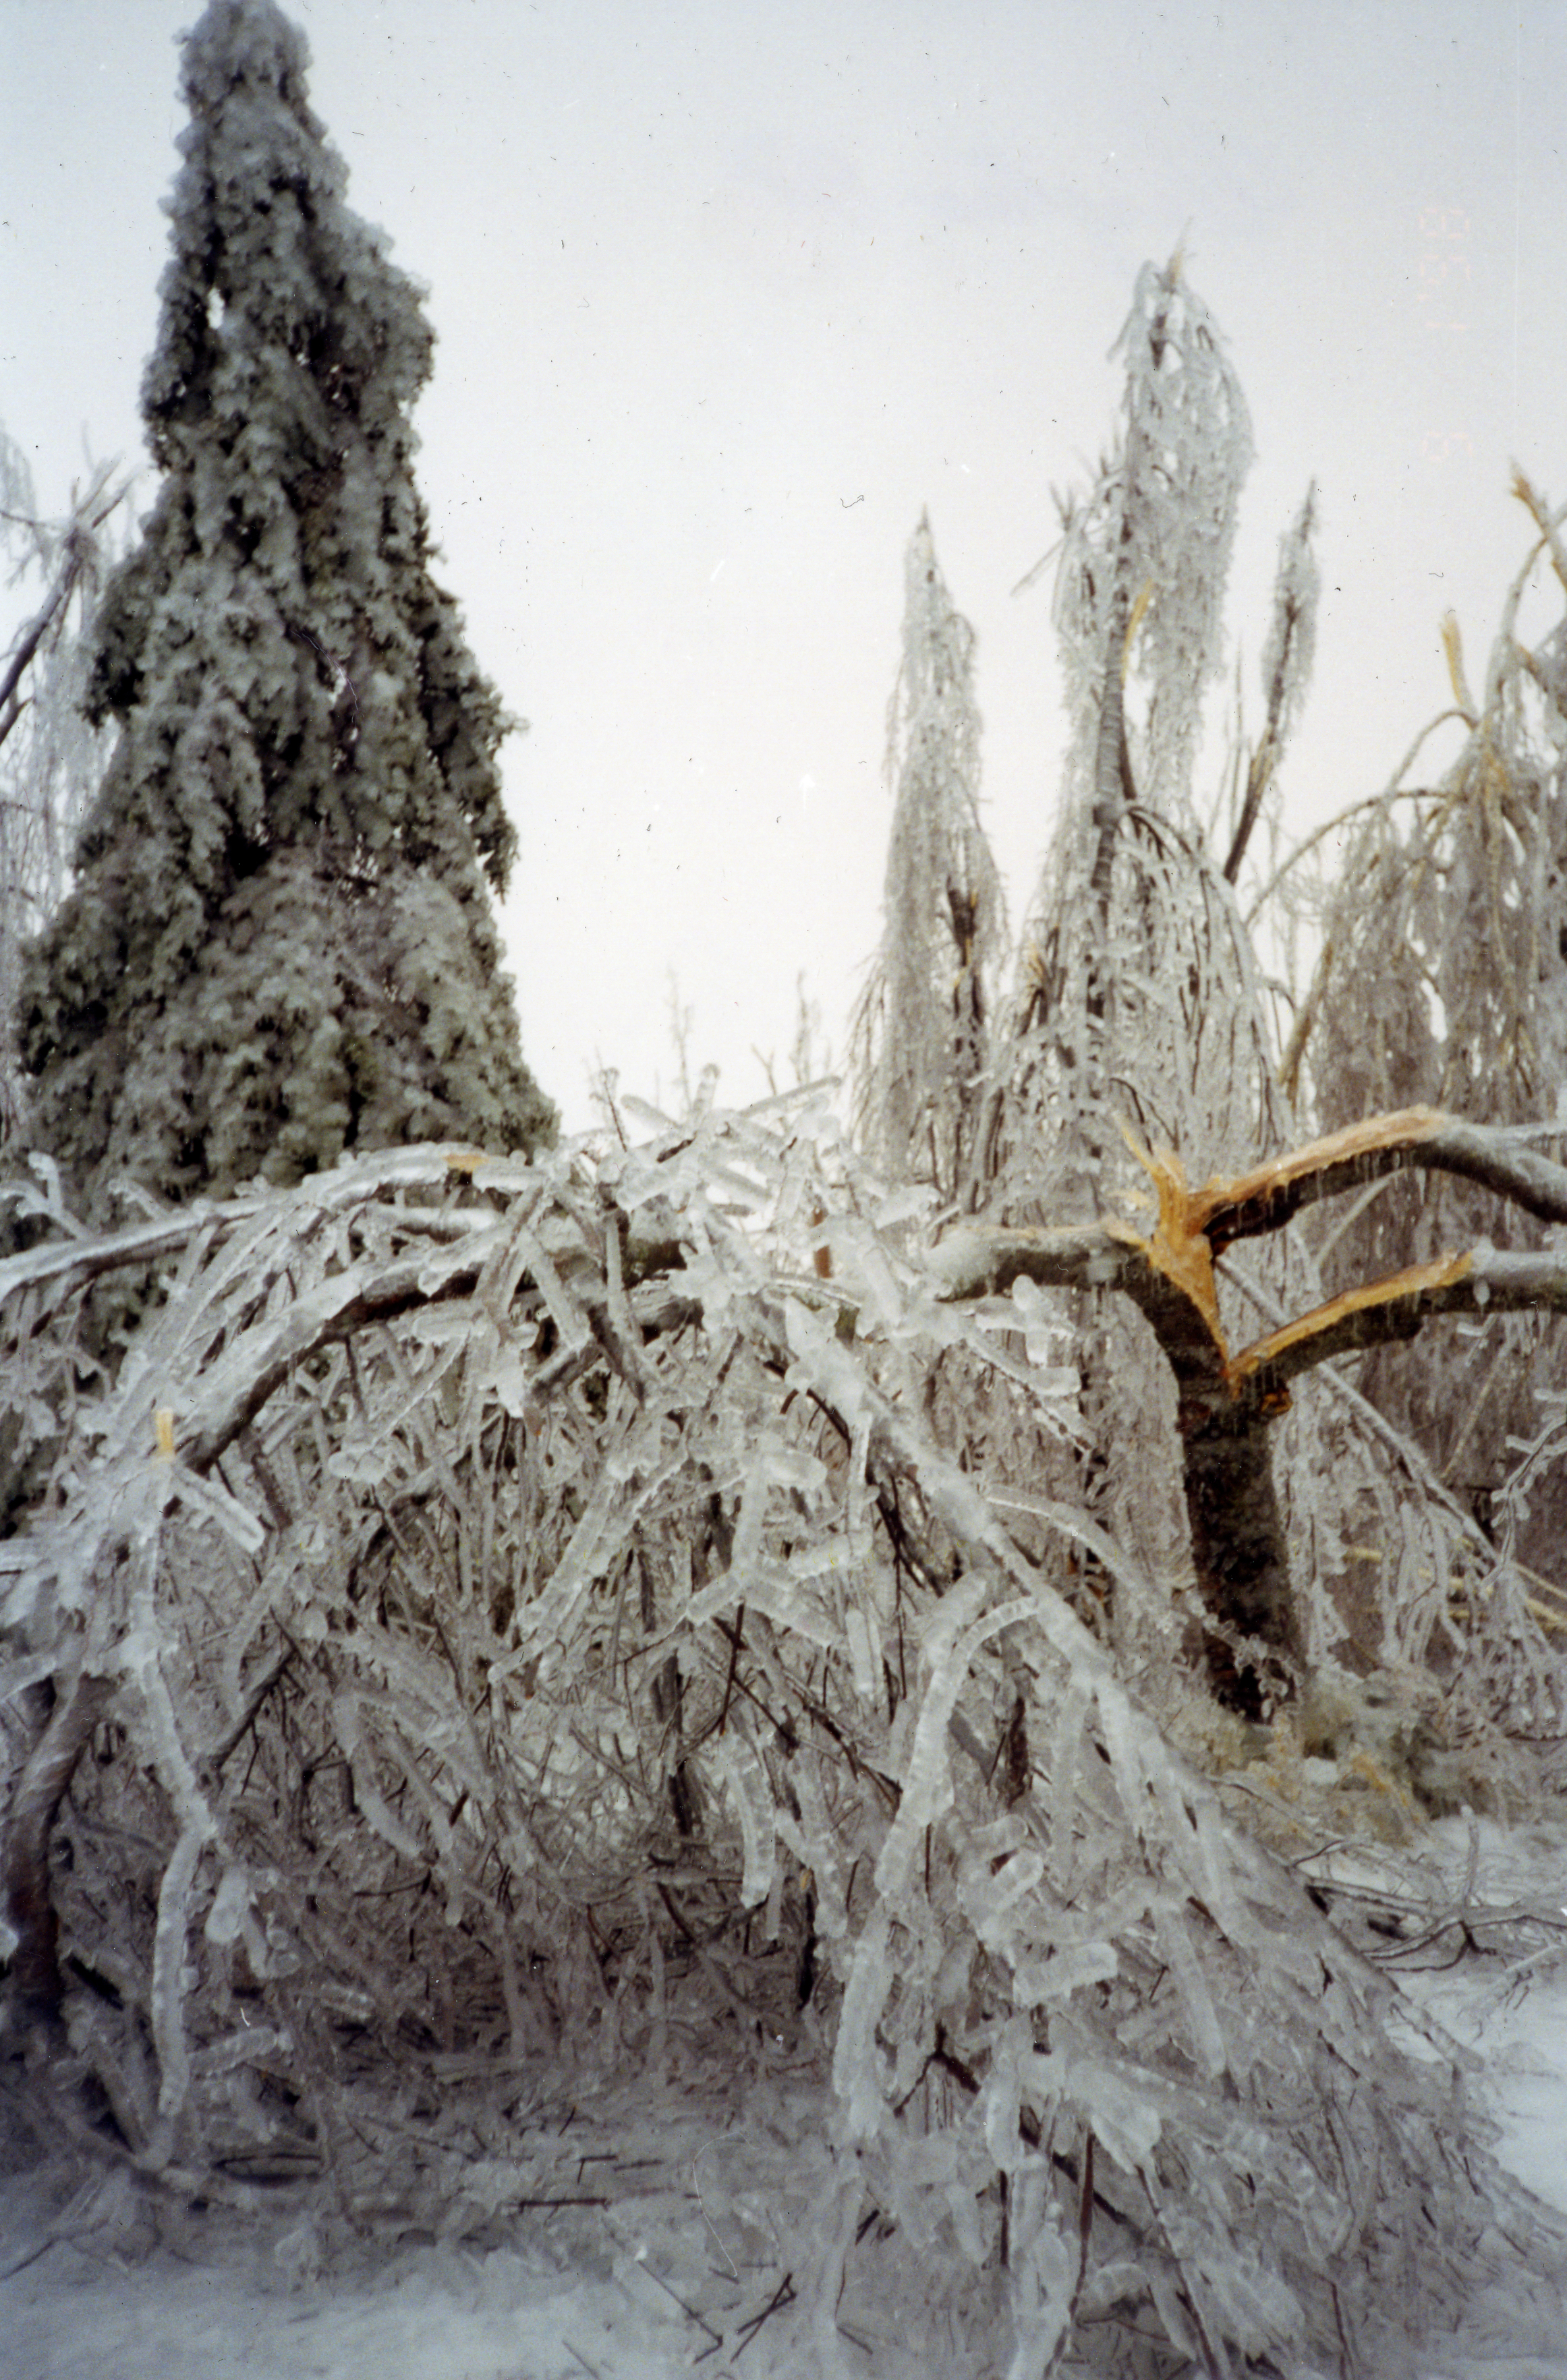 The ice increased the weight of the branches until they eventually break.